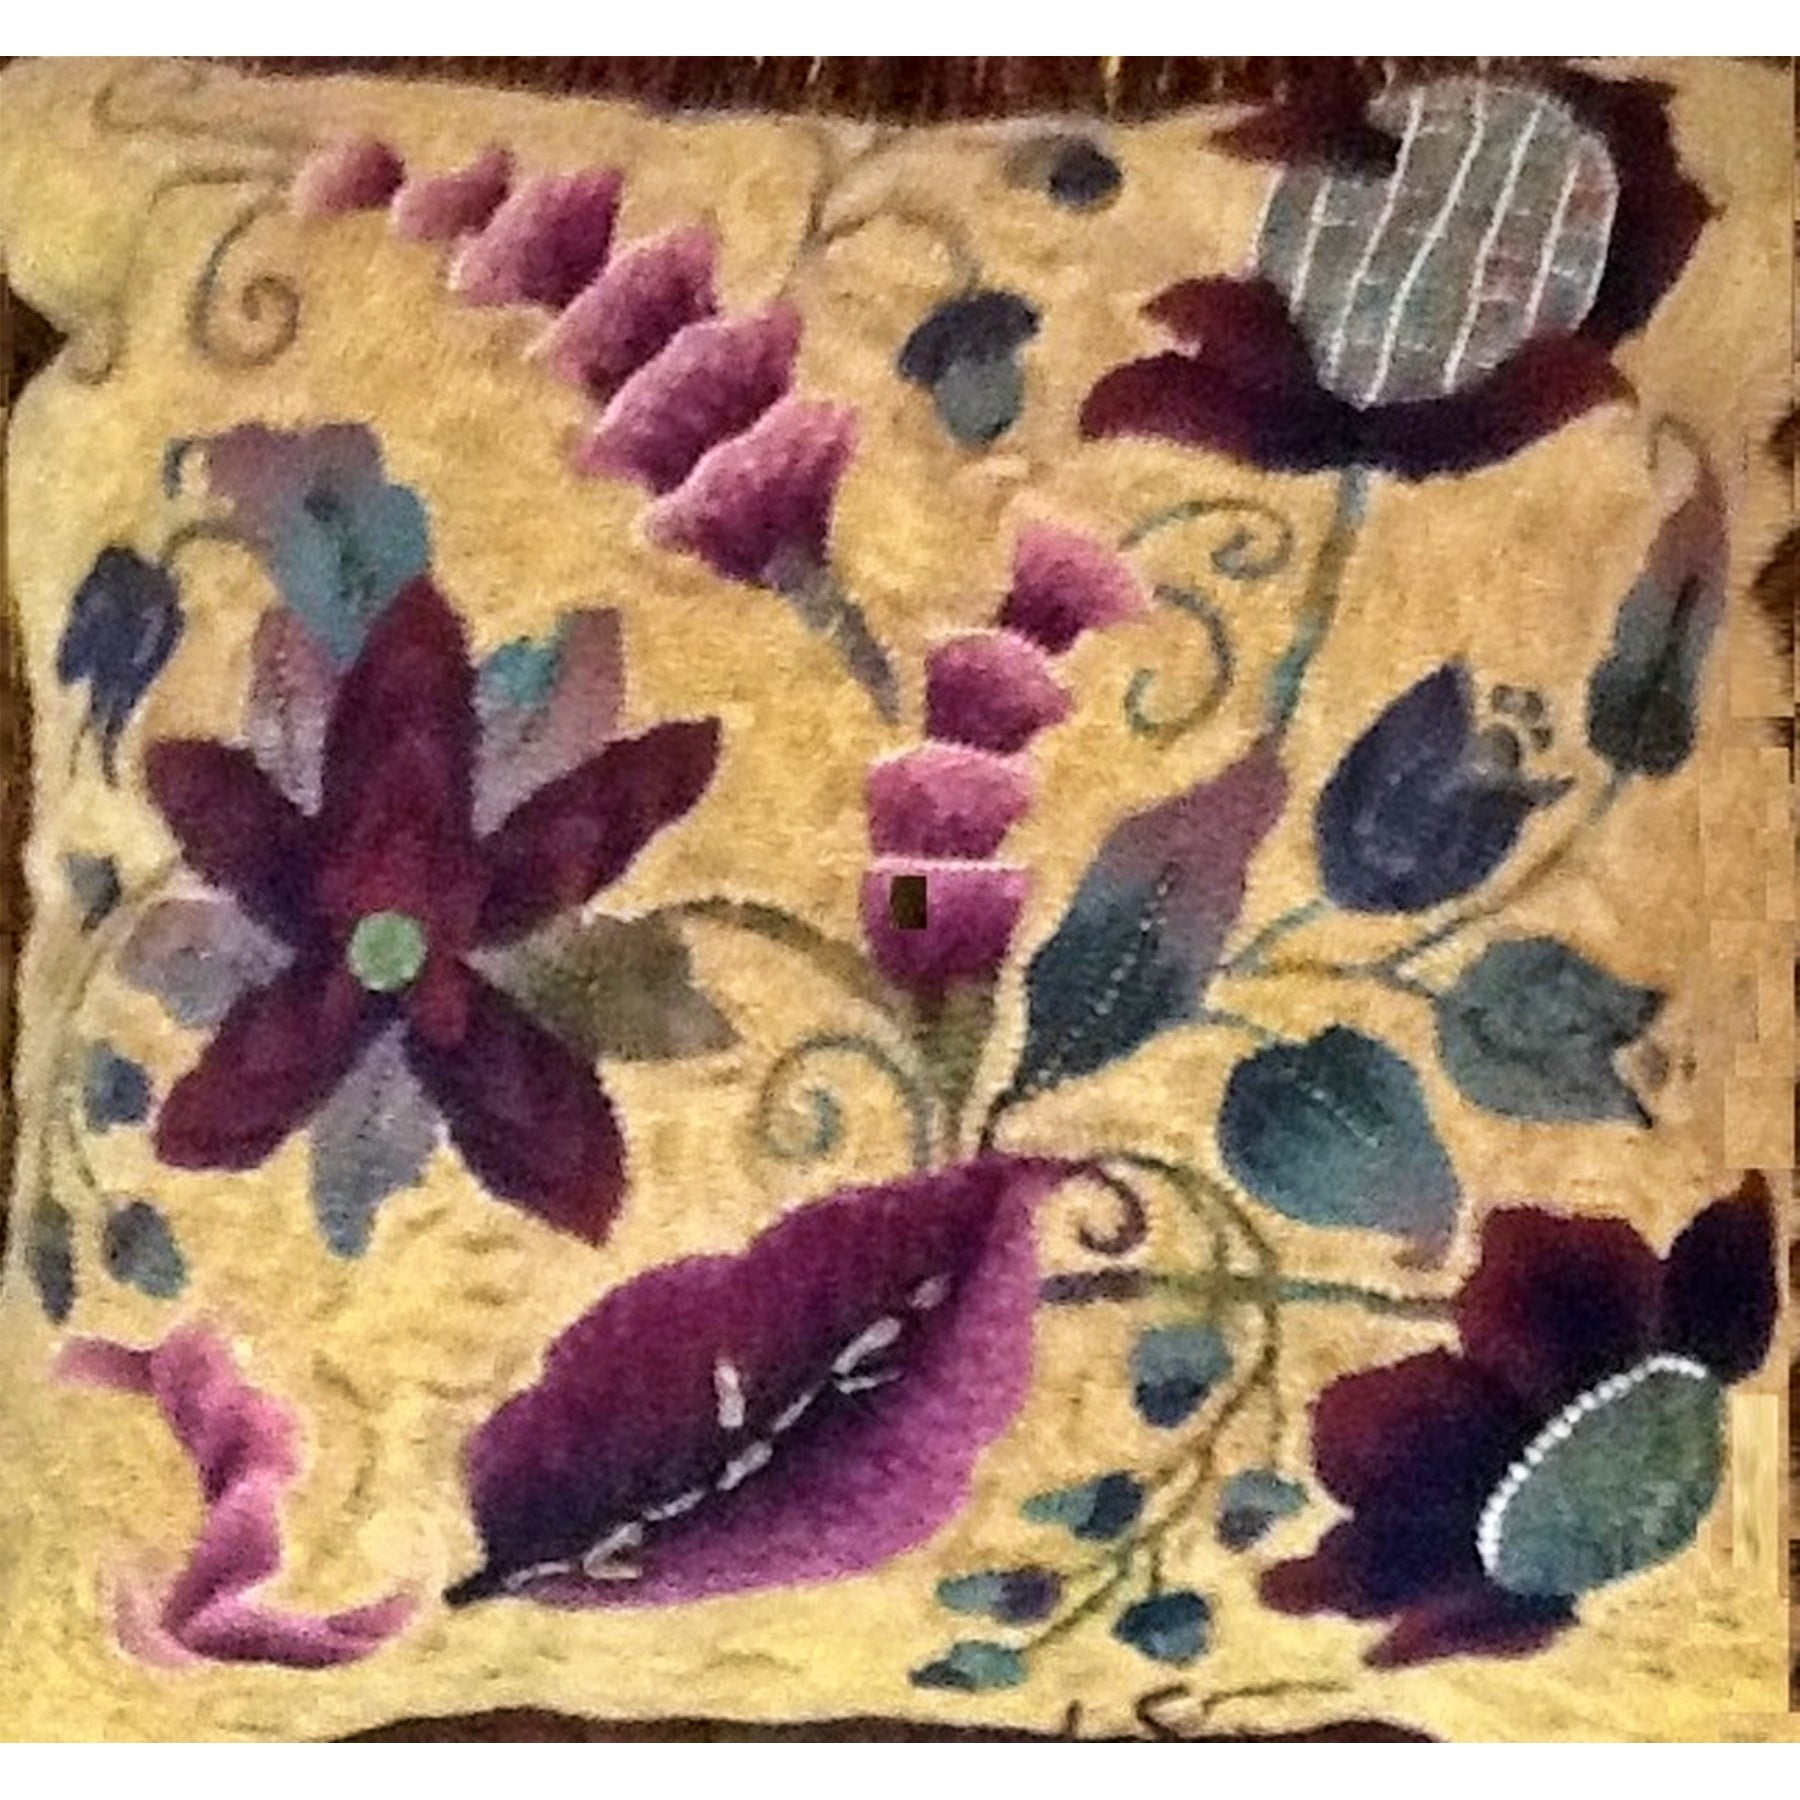 Hampden – Panel A – Large, rug hooked by Cindy Irwin